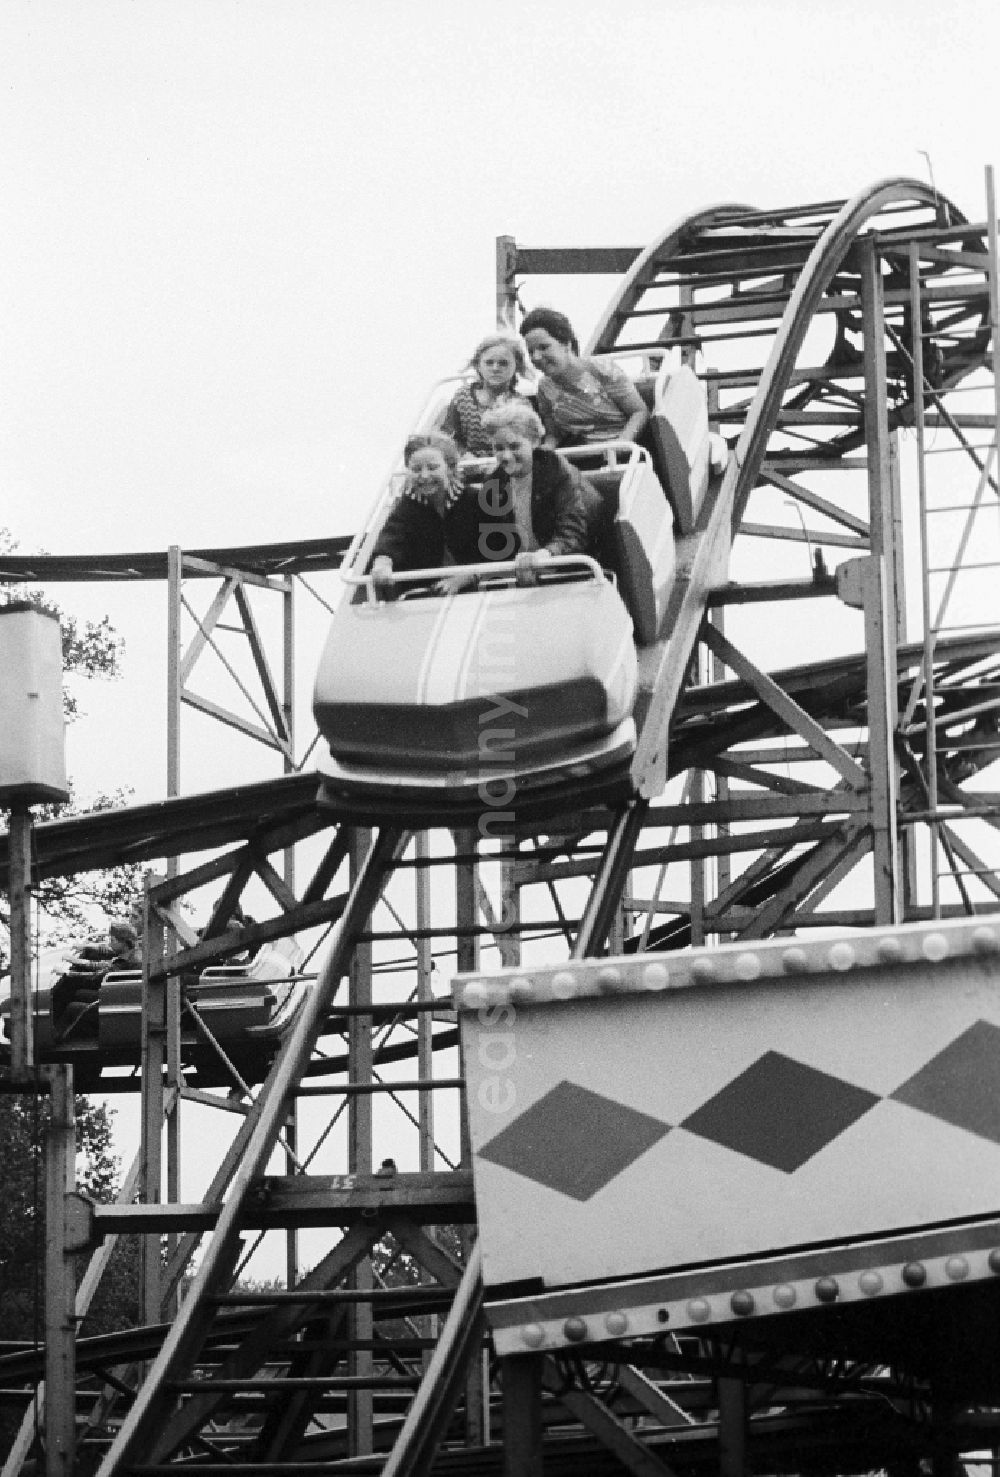 GDR image archive: Berlin - Roller coaster on the area of the cultural park Plaenterwald in Berlin, the former capital of the GDR, German democratic republic